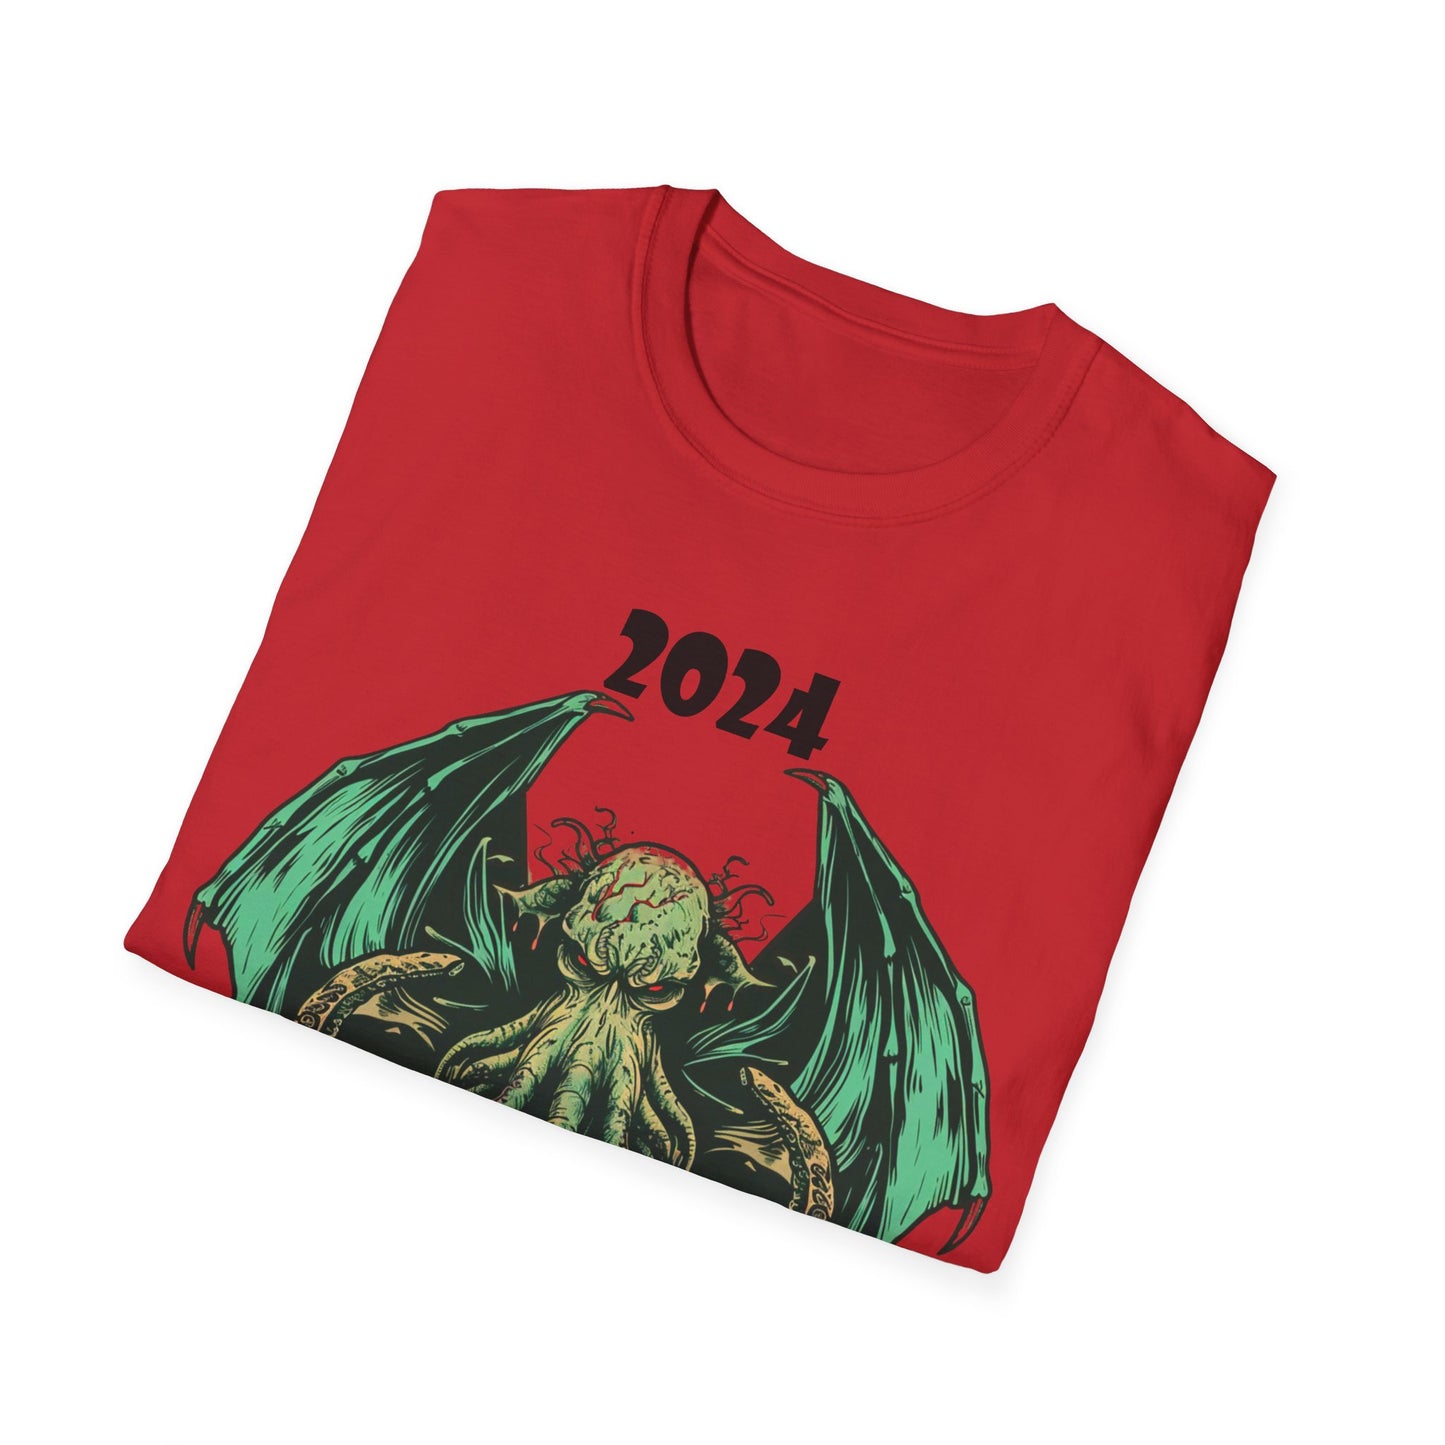 2024 Cthulhu Why Choose The Lesser Evil - White w Black - Unisex Softstyle T-Shirt